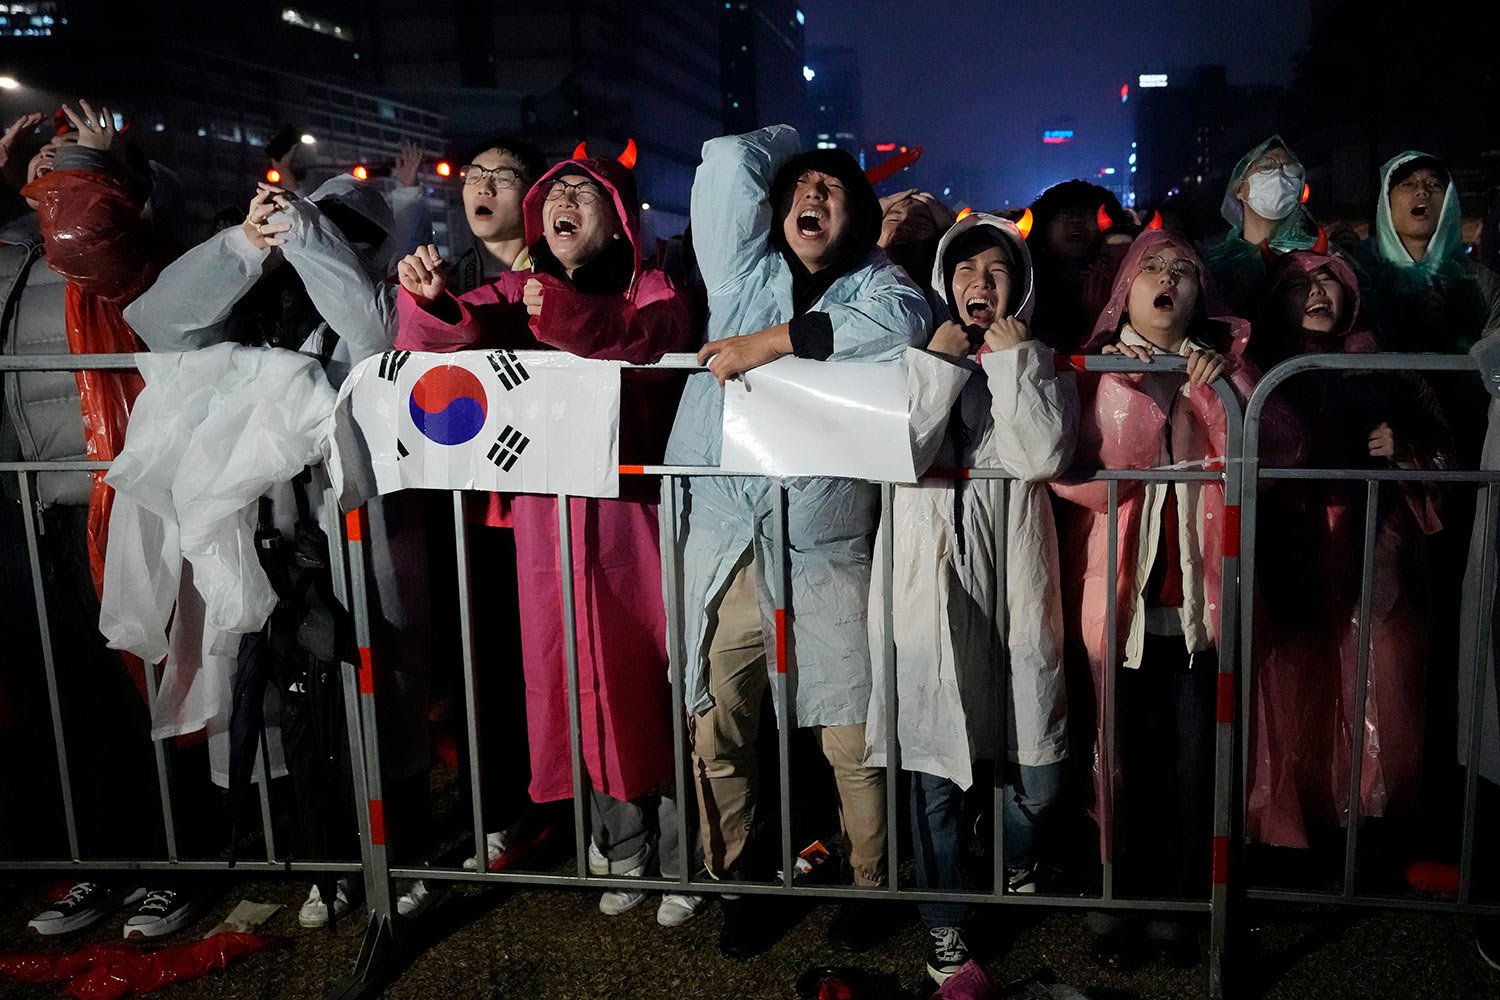  South Korean soccer fans react as they watch a live broadcast of the Group H World Cup soccer match between South Korea and Ghana played in Qatar, at a public viewing venue in Seoul, South Korea, Monday, Nov. 28, 2022. (AP Photo/Ahn Young-joon) 